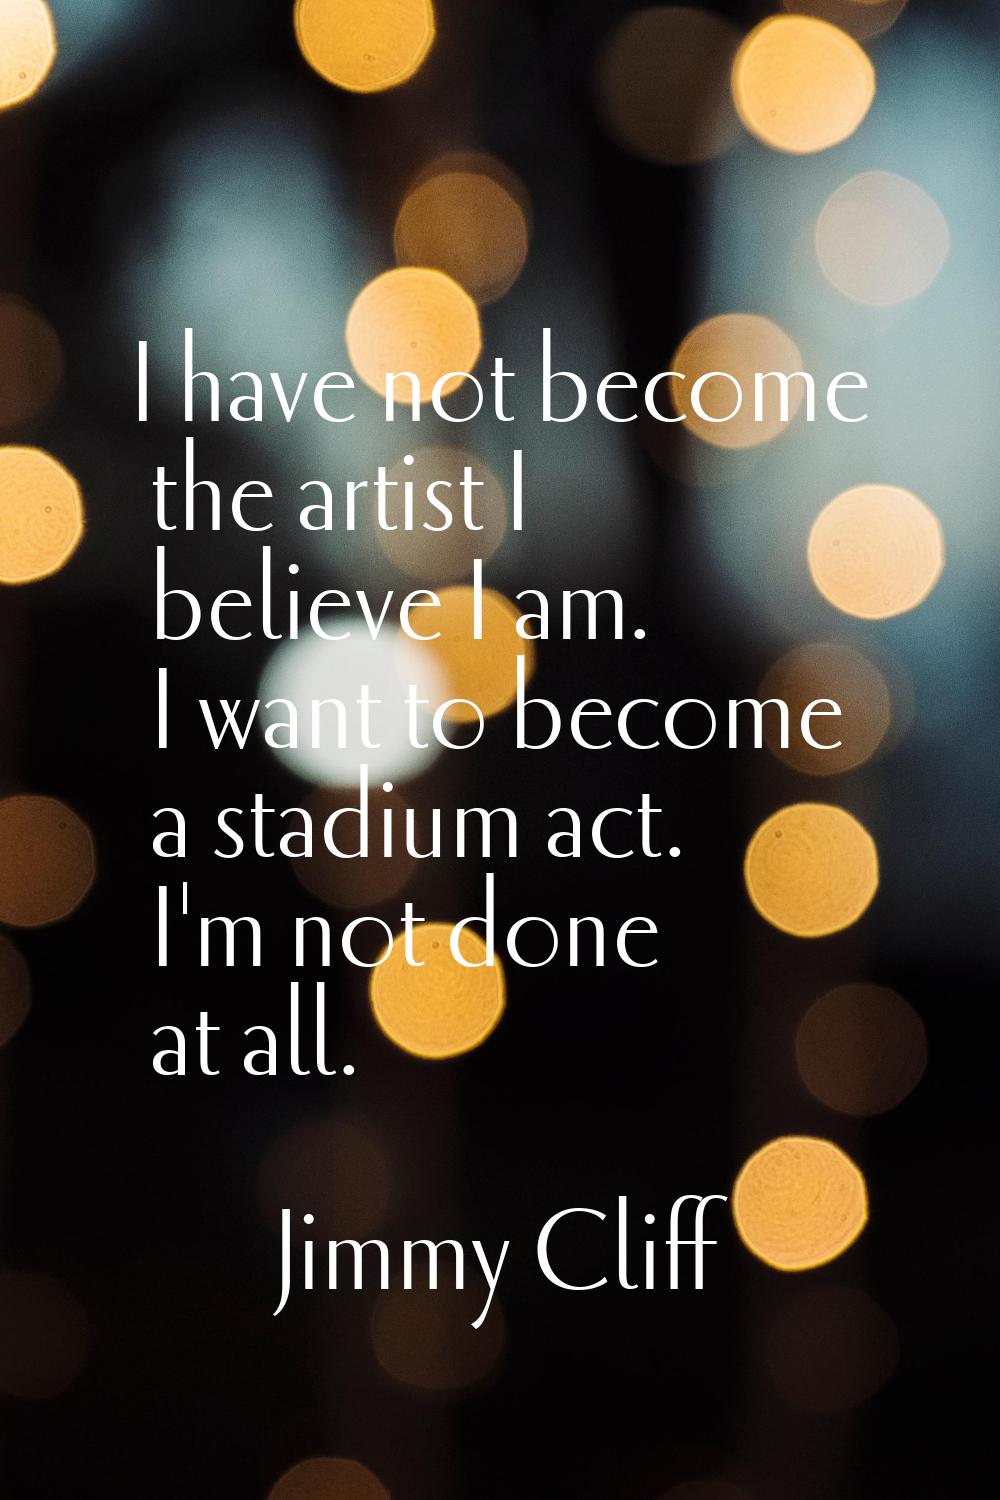 I have not become the artist I believe I am. I want to become a stadium act. I'm not done at all.